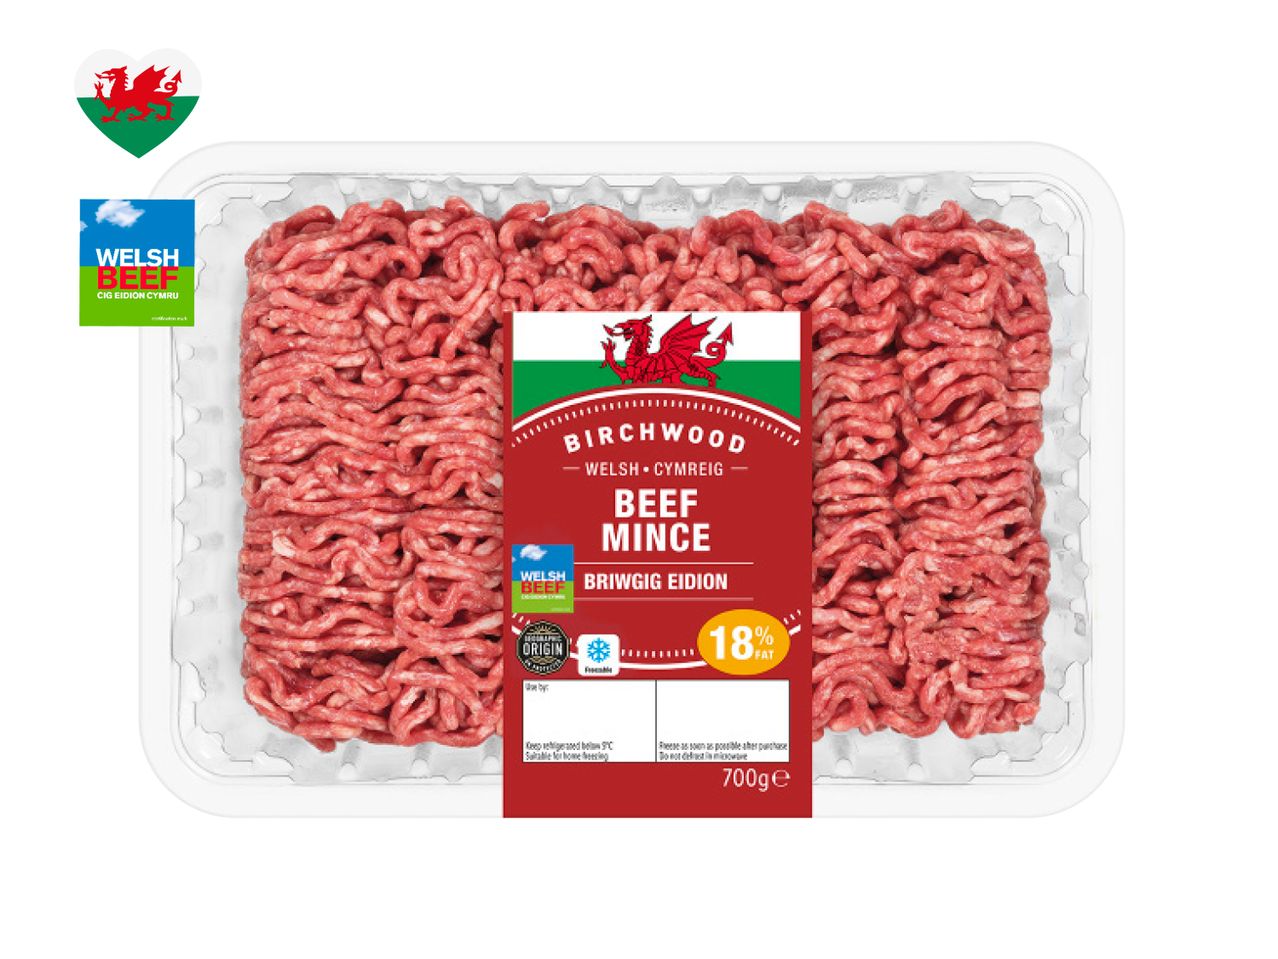 Go to full screen view: Birchwood Welsh 18% Beef Mince - Image 1